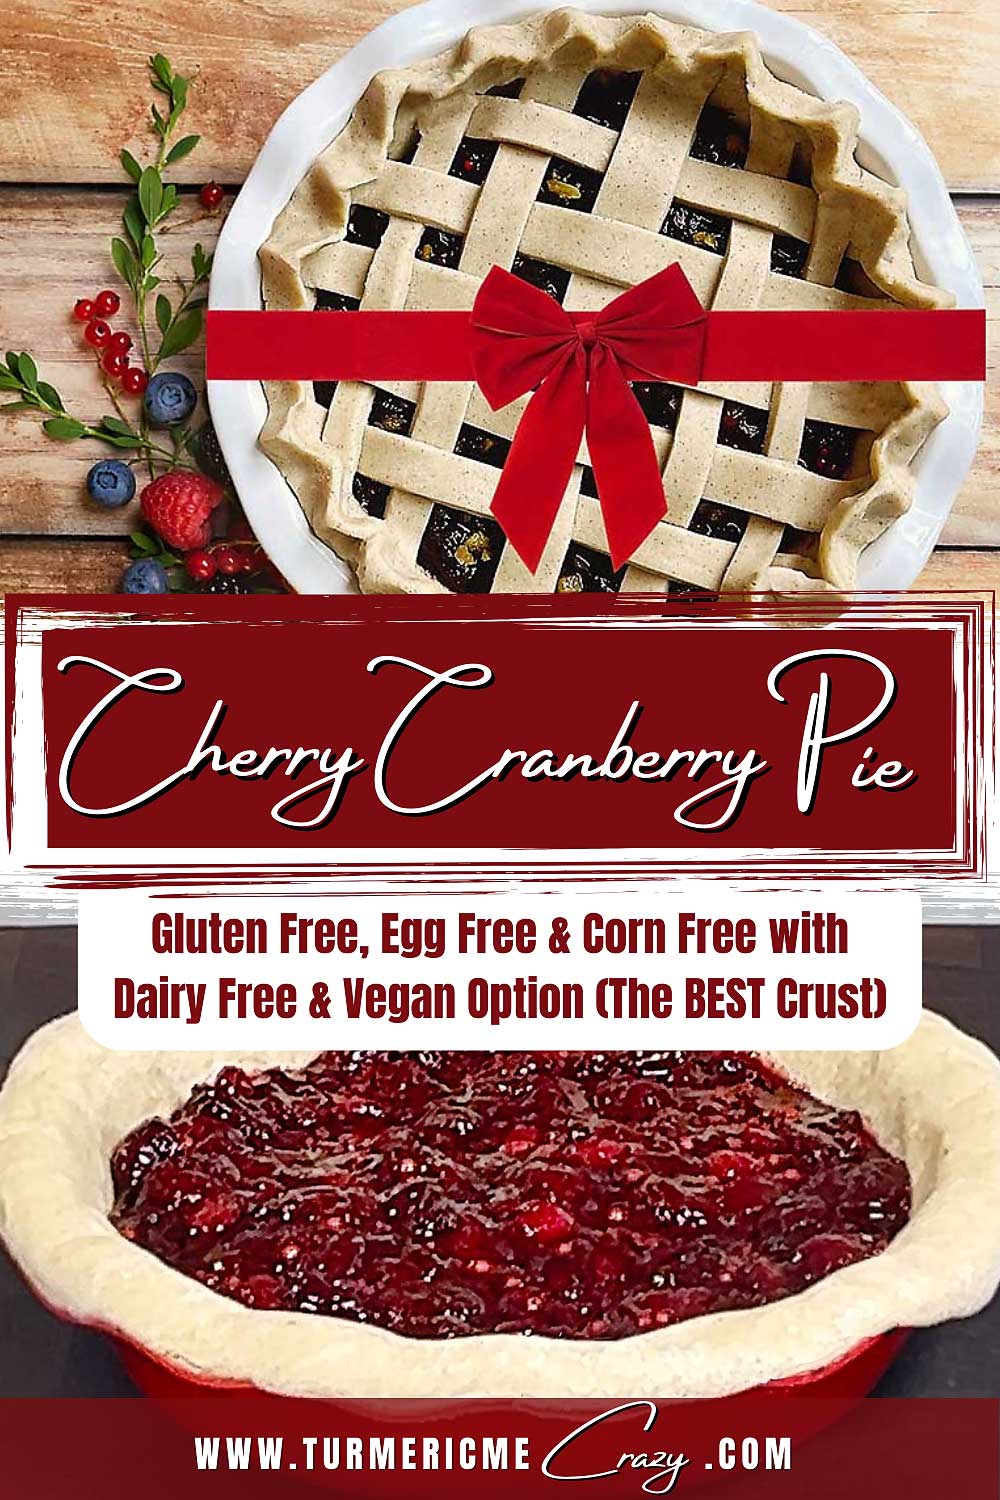 Bursting with the vibrant flavours of the holiday season, this festive cherry cranberry pie filling is the perfect holiday dessert! #holidayrecipe #cherrypiefilling #cherrypierecipe #glutenfreepie #egglesspie #glutenfreeandeggfreepie #glutenfreedessert